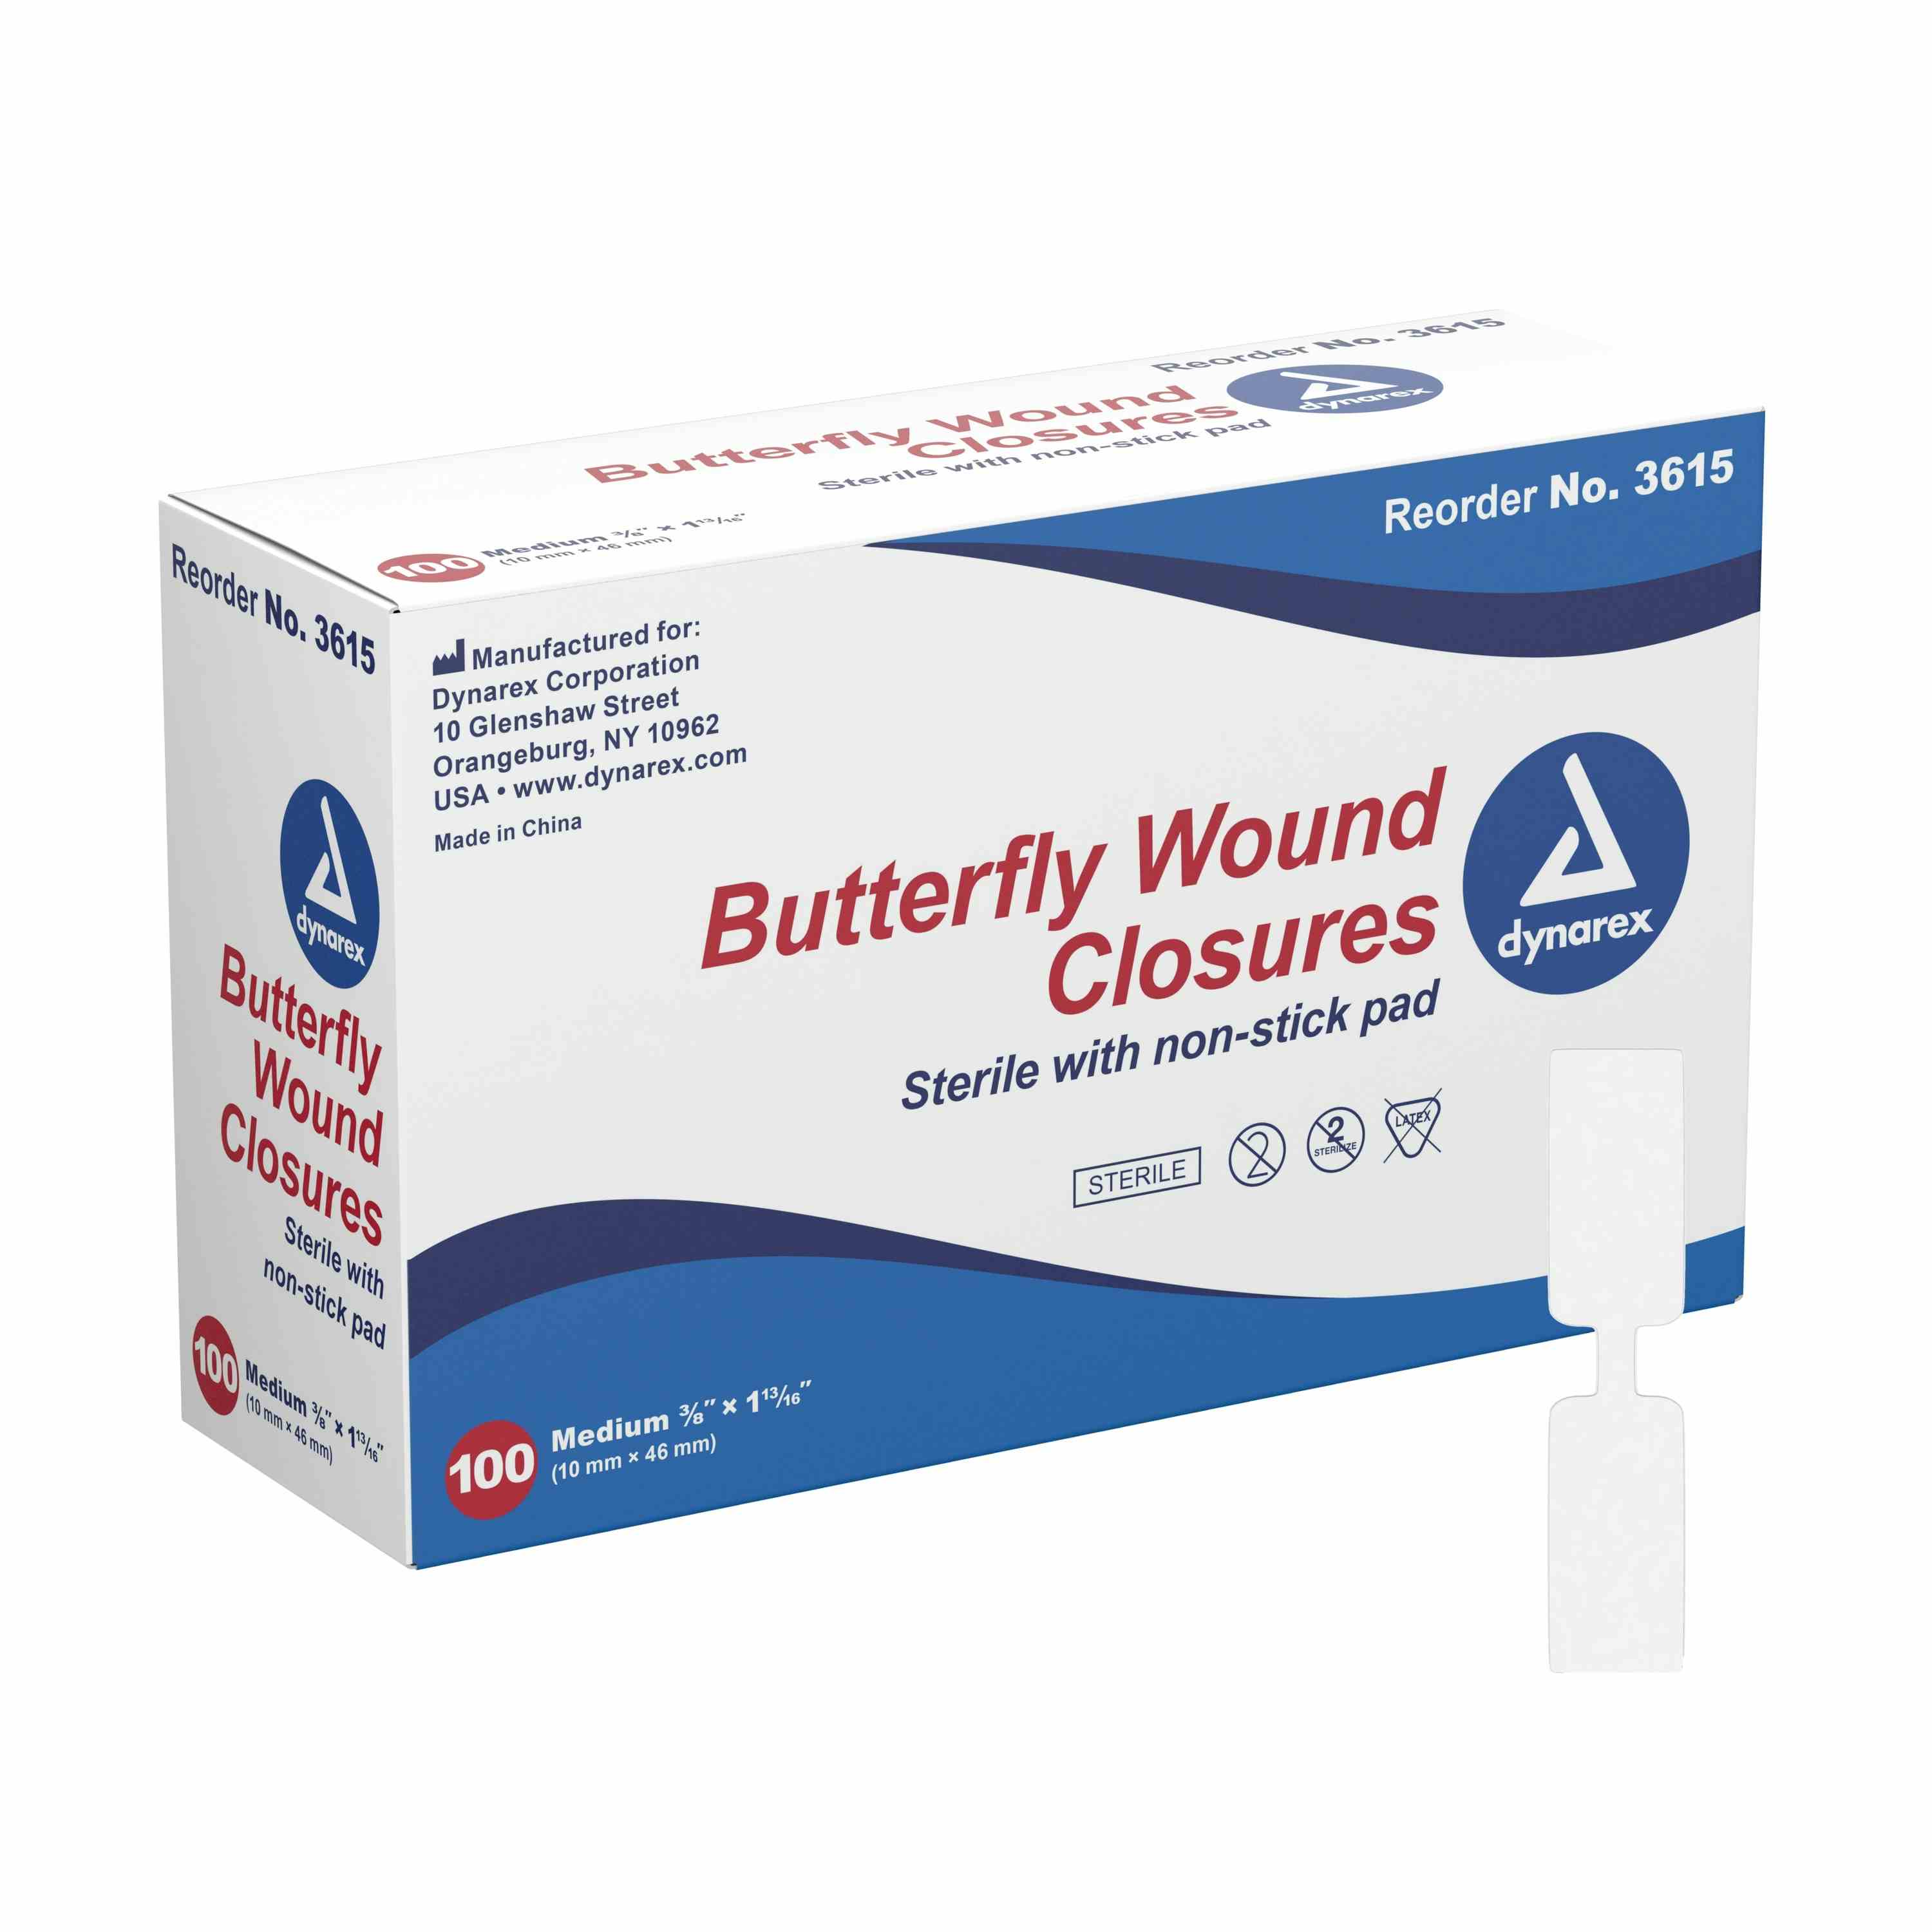 Dynarex Sterile with Non-Stick Pad Butterfly Wound Closures, 3/8 X 1-13/16", 3615, Box of 100